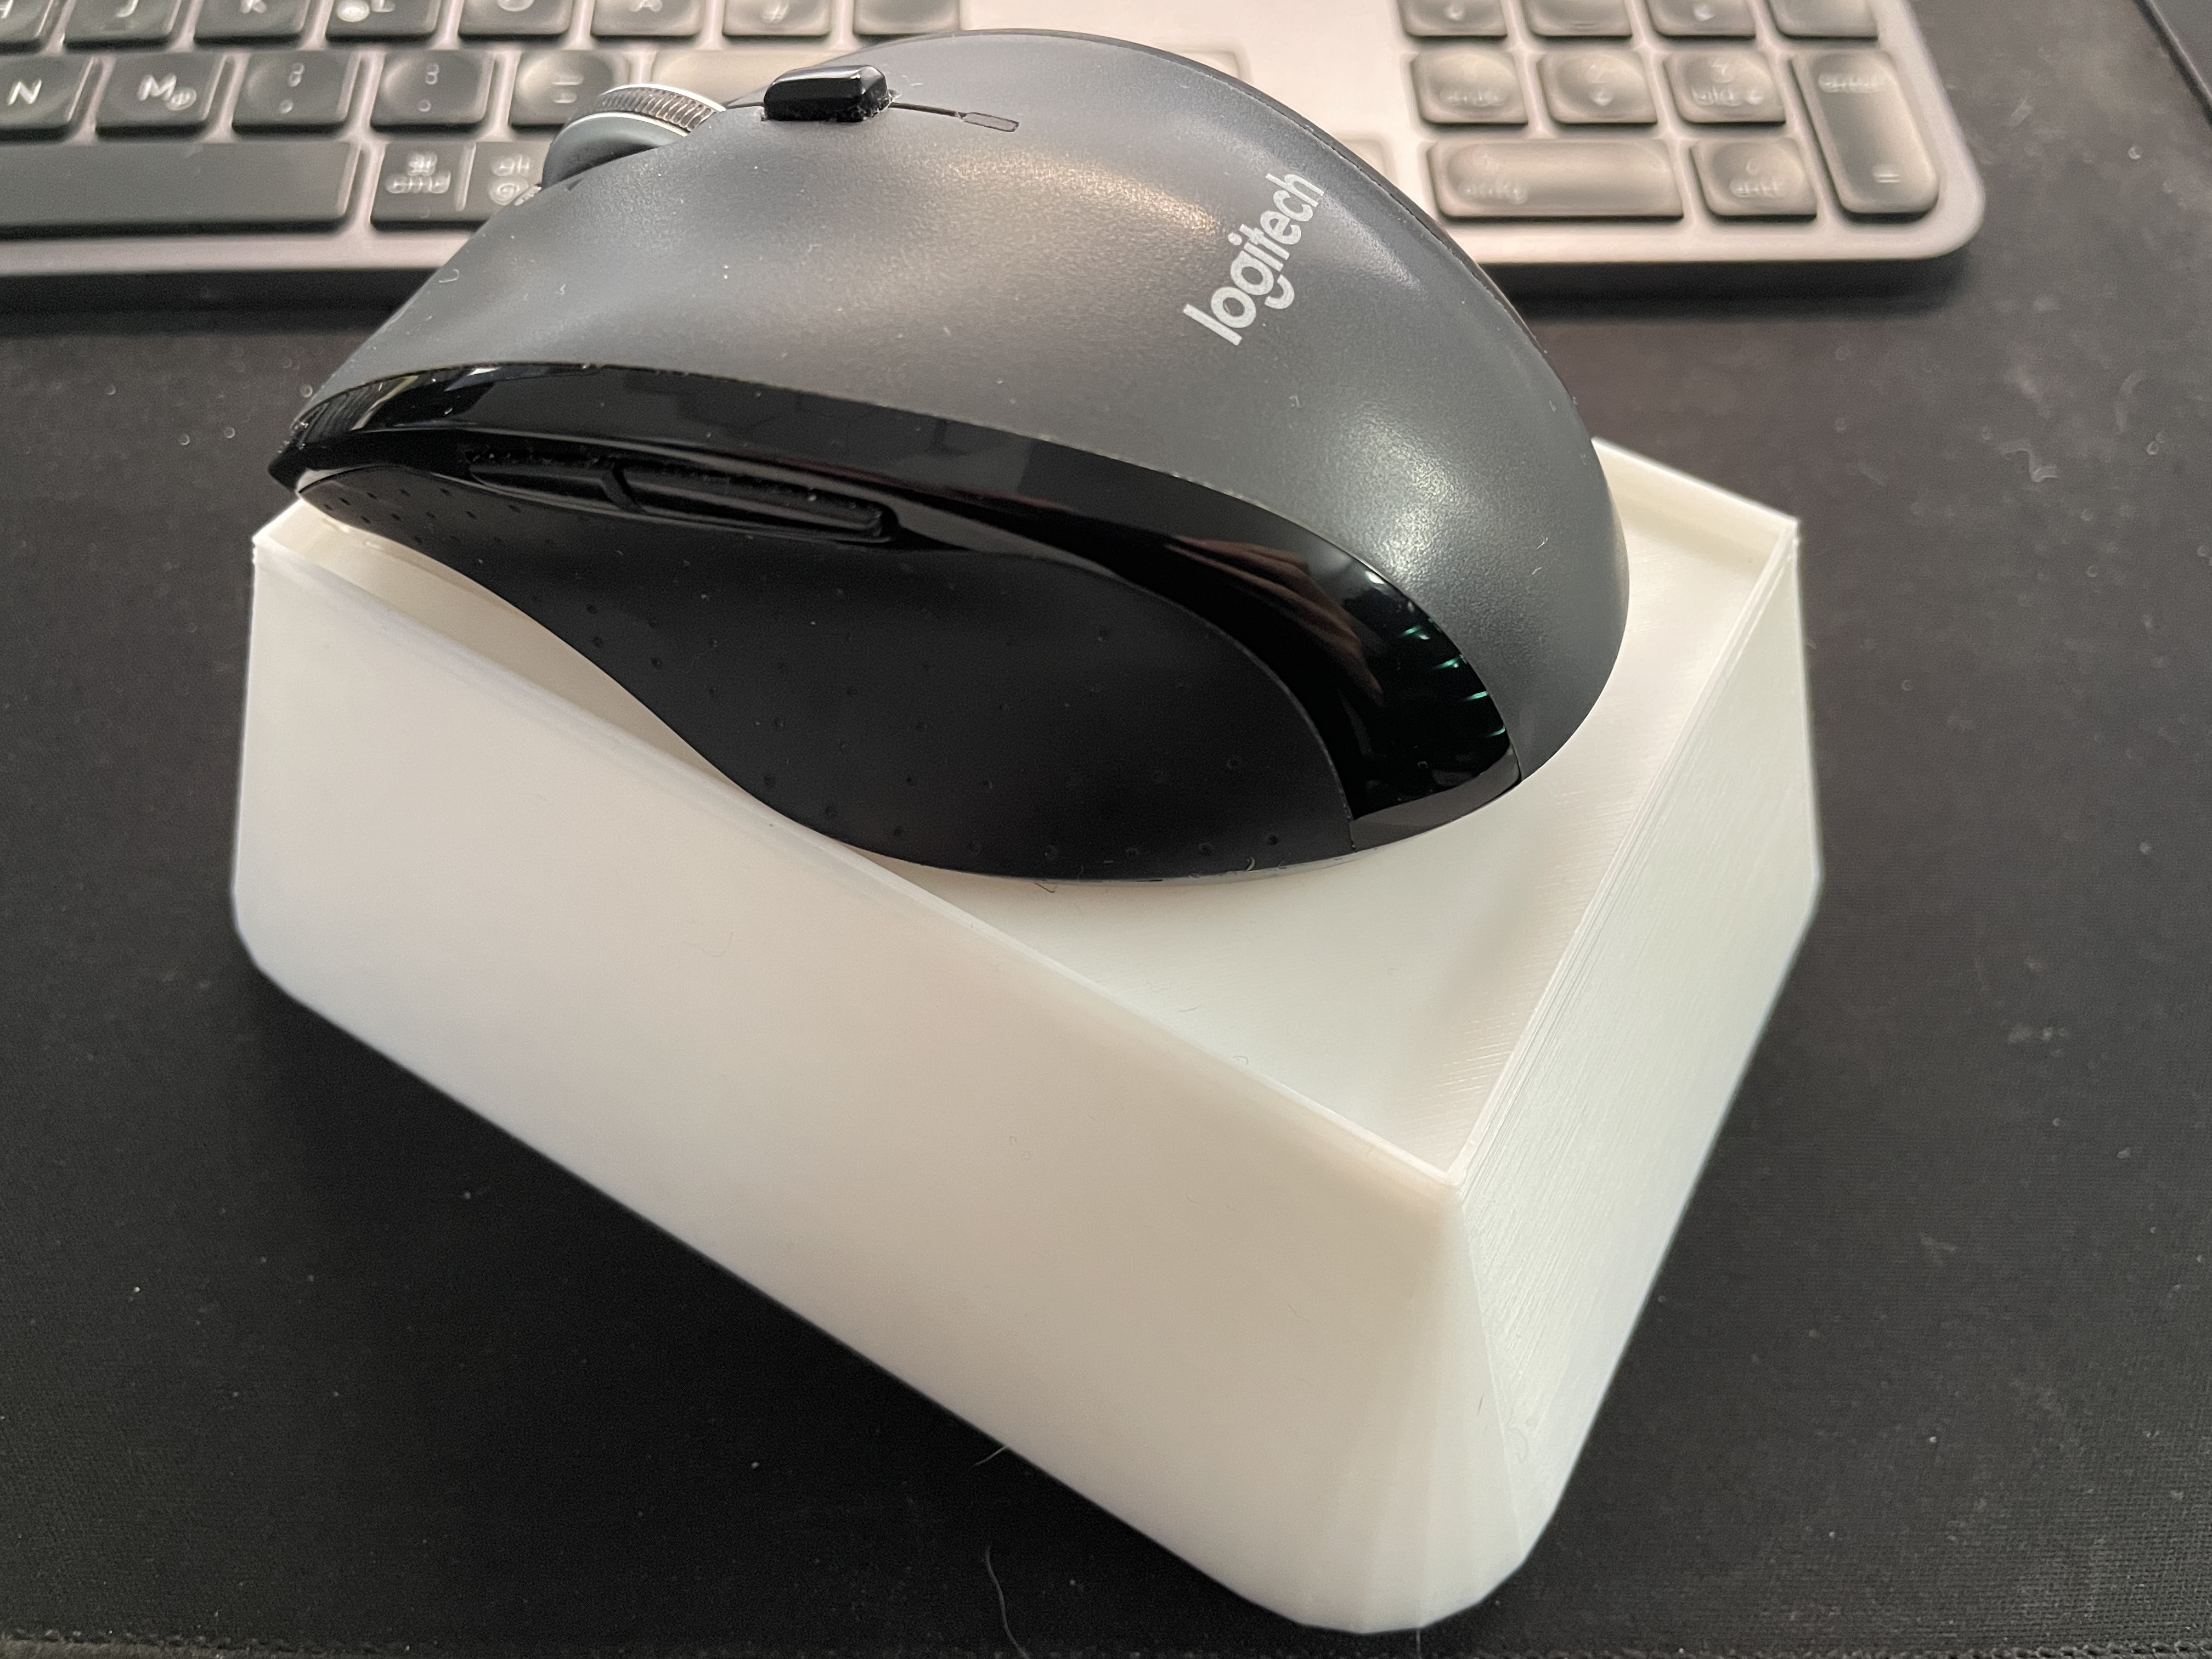 The Procrastinator 3000 - A Low Tech, Easy To Print, Failproof And Undetectable Mouse Jiggler